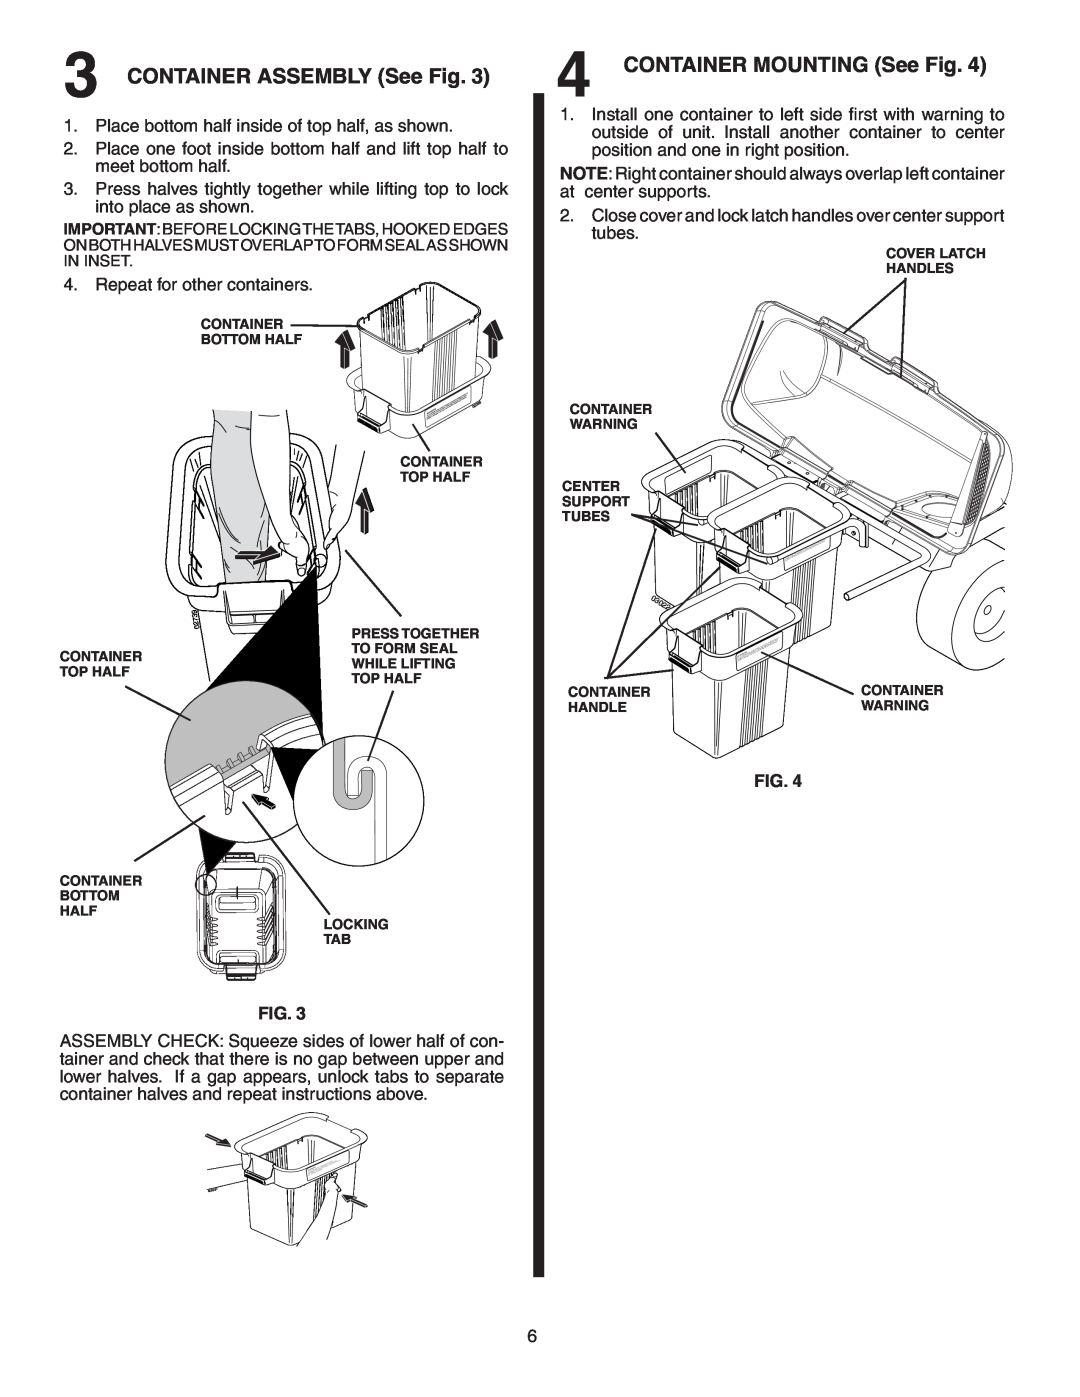 Poulan 960 72 00-12, LTT354, 96072001200, 406288 owner manual CONTAINER ASSEMBLY See Fig, CONTAINER MOUNTING See Fig 